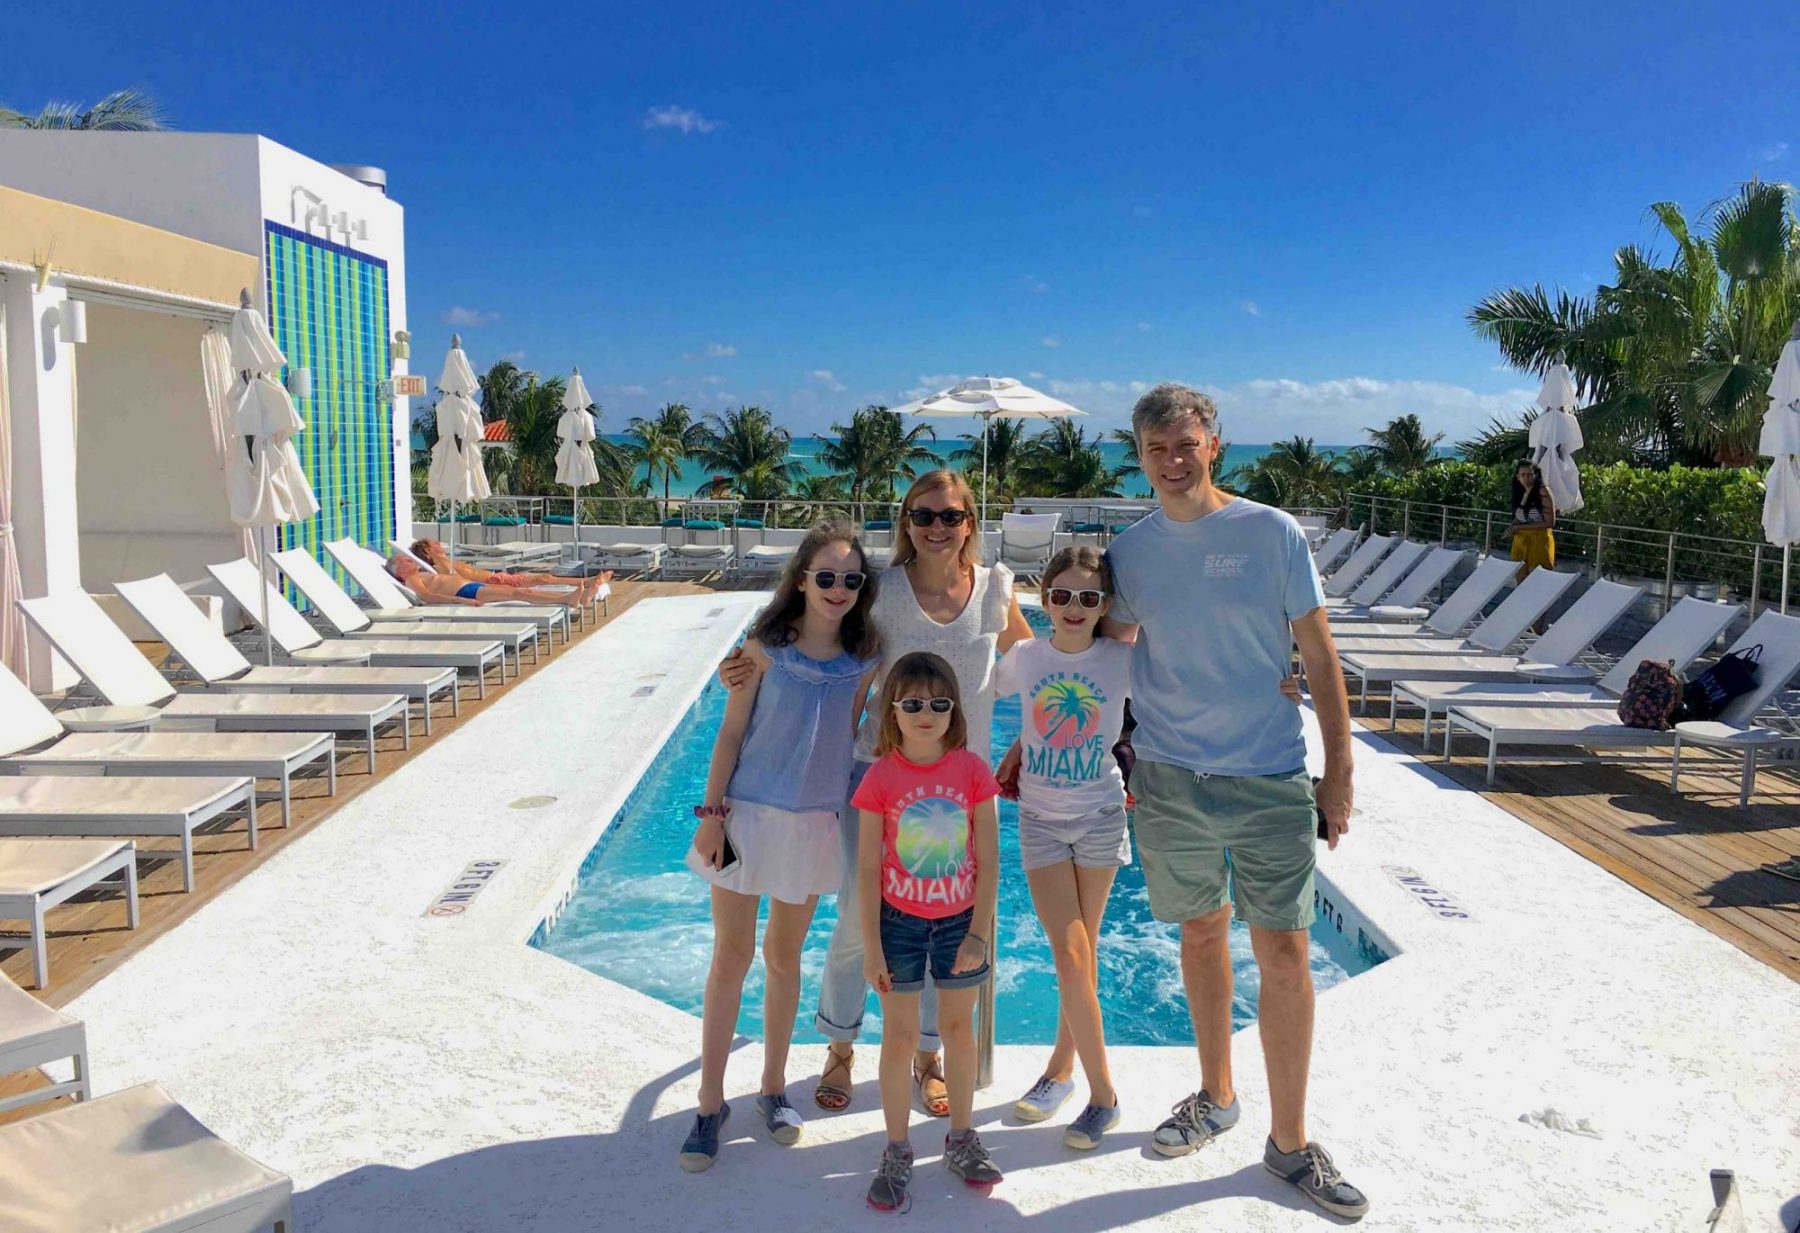 Family poing in front of a rooftop pool in South Beach during an Offbeat Miami Art Deco tour.